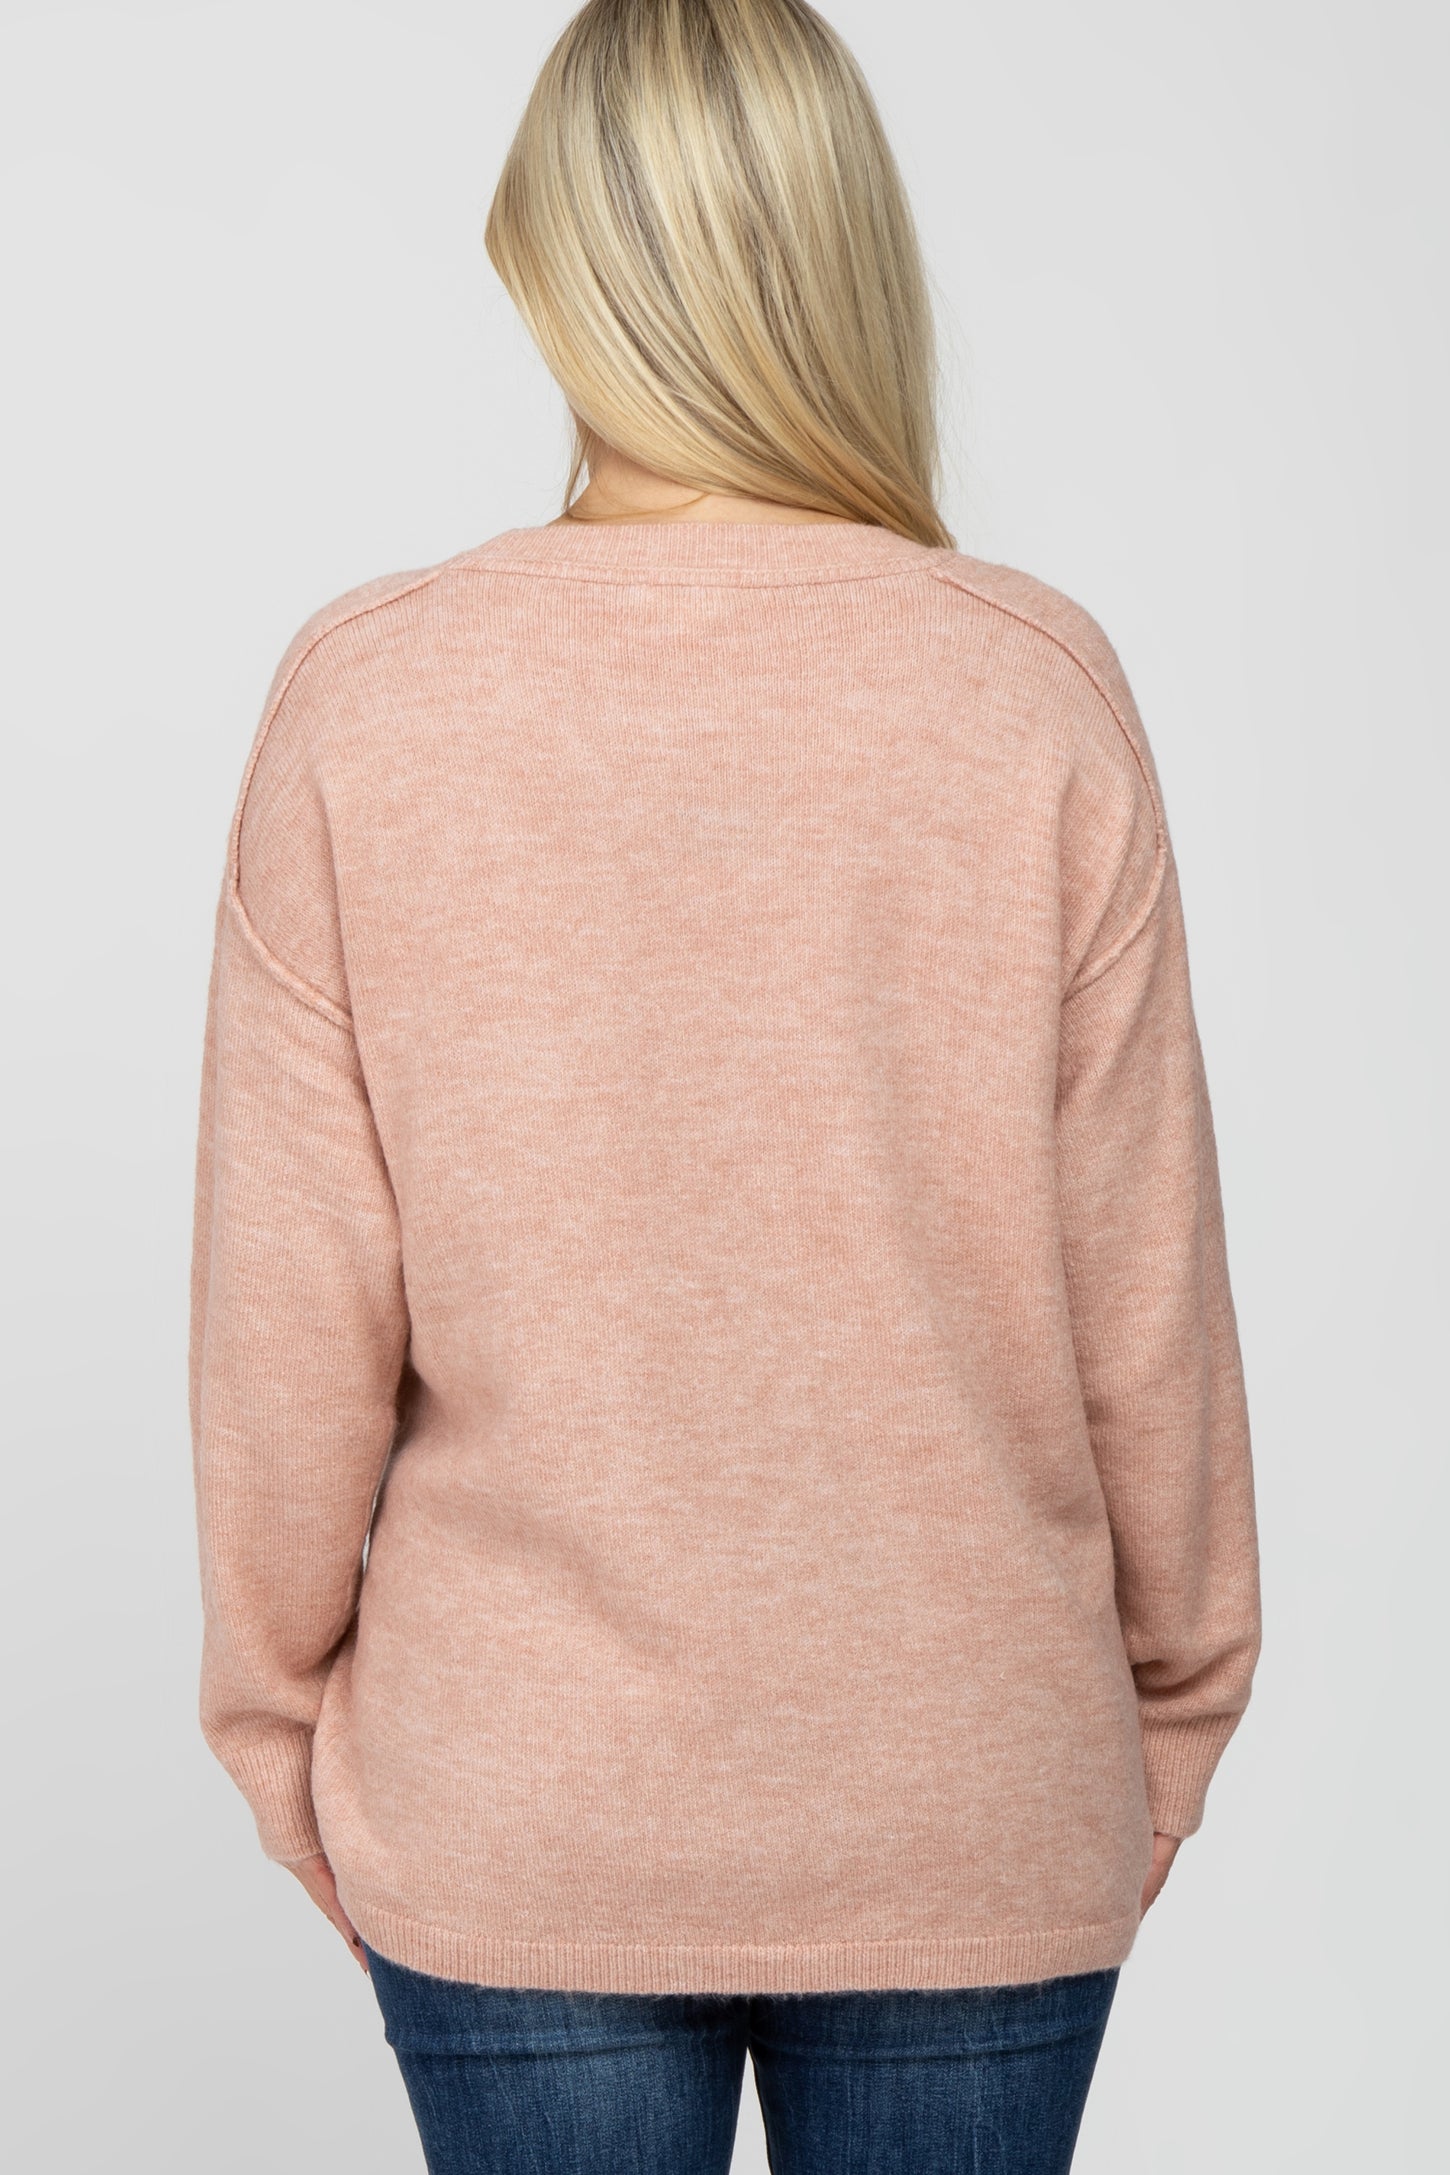 Light Pink Solid Basic Maternity Sweater